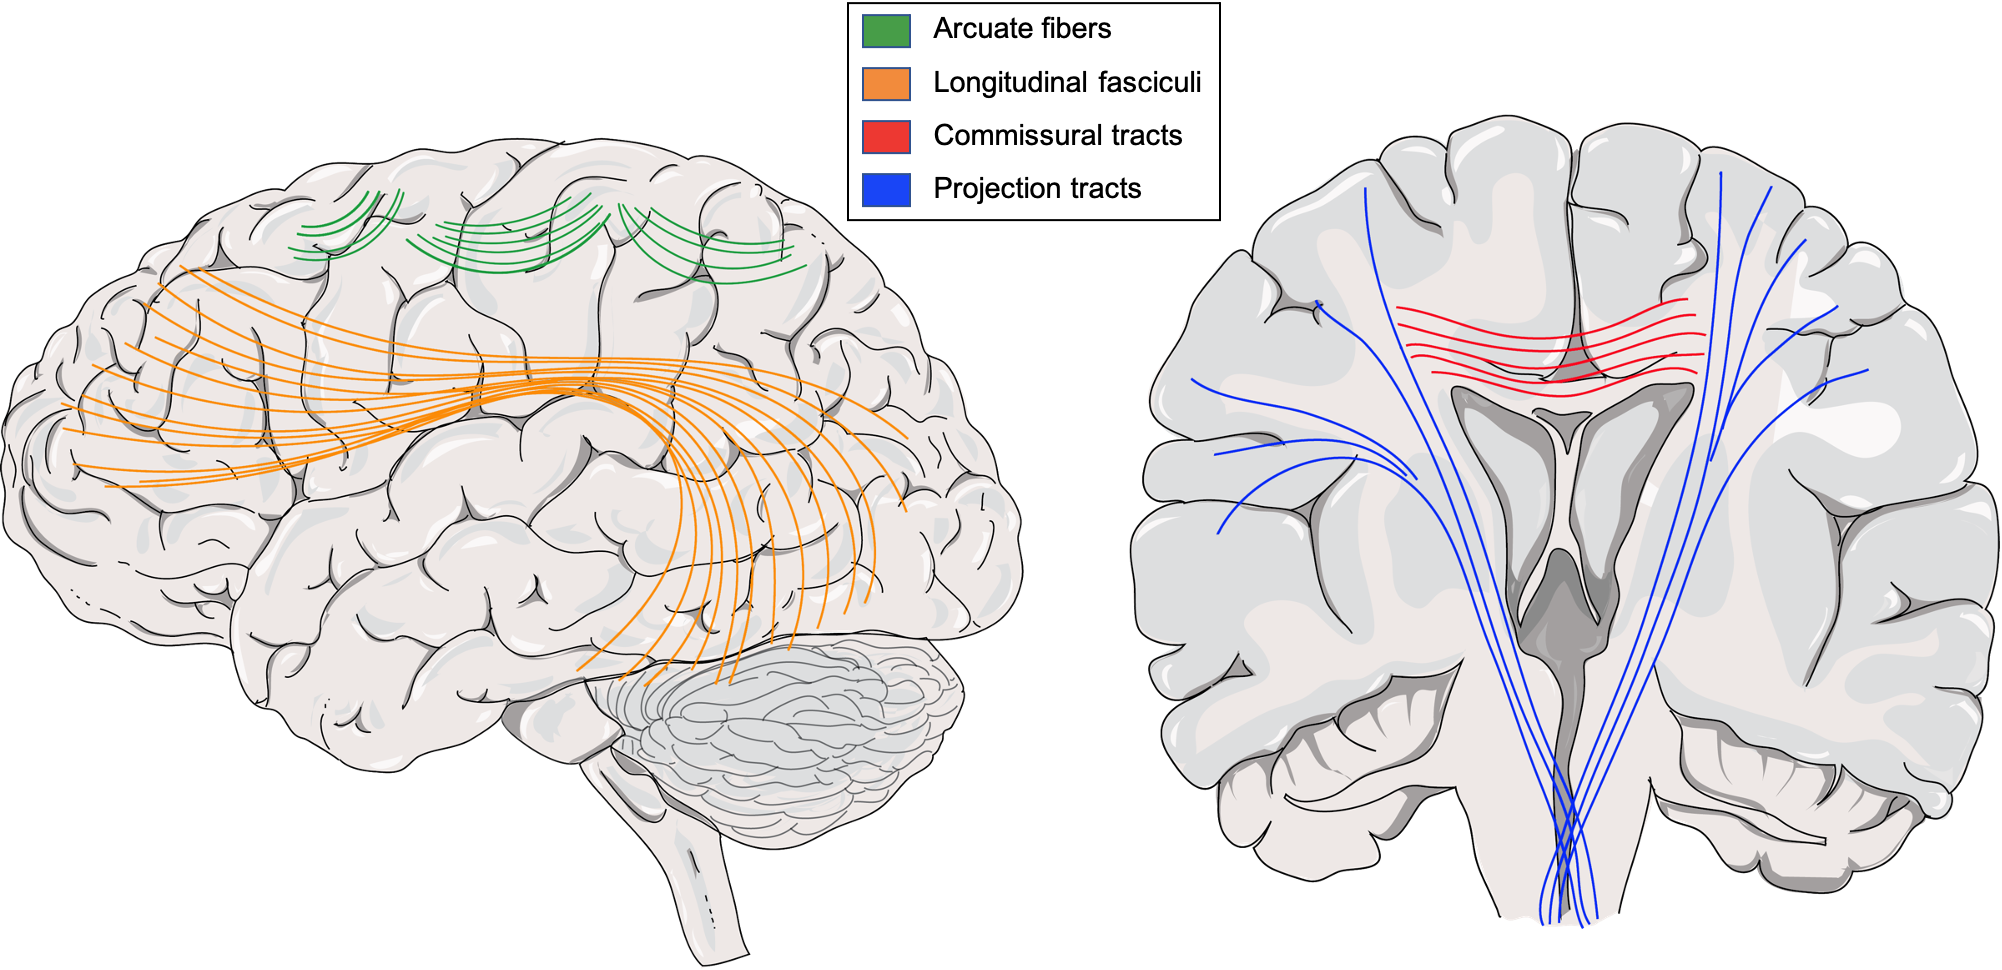 Lateral view on the left and coronal section on right. Colored lines that connect different regions.